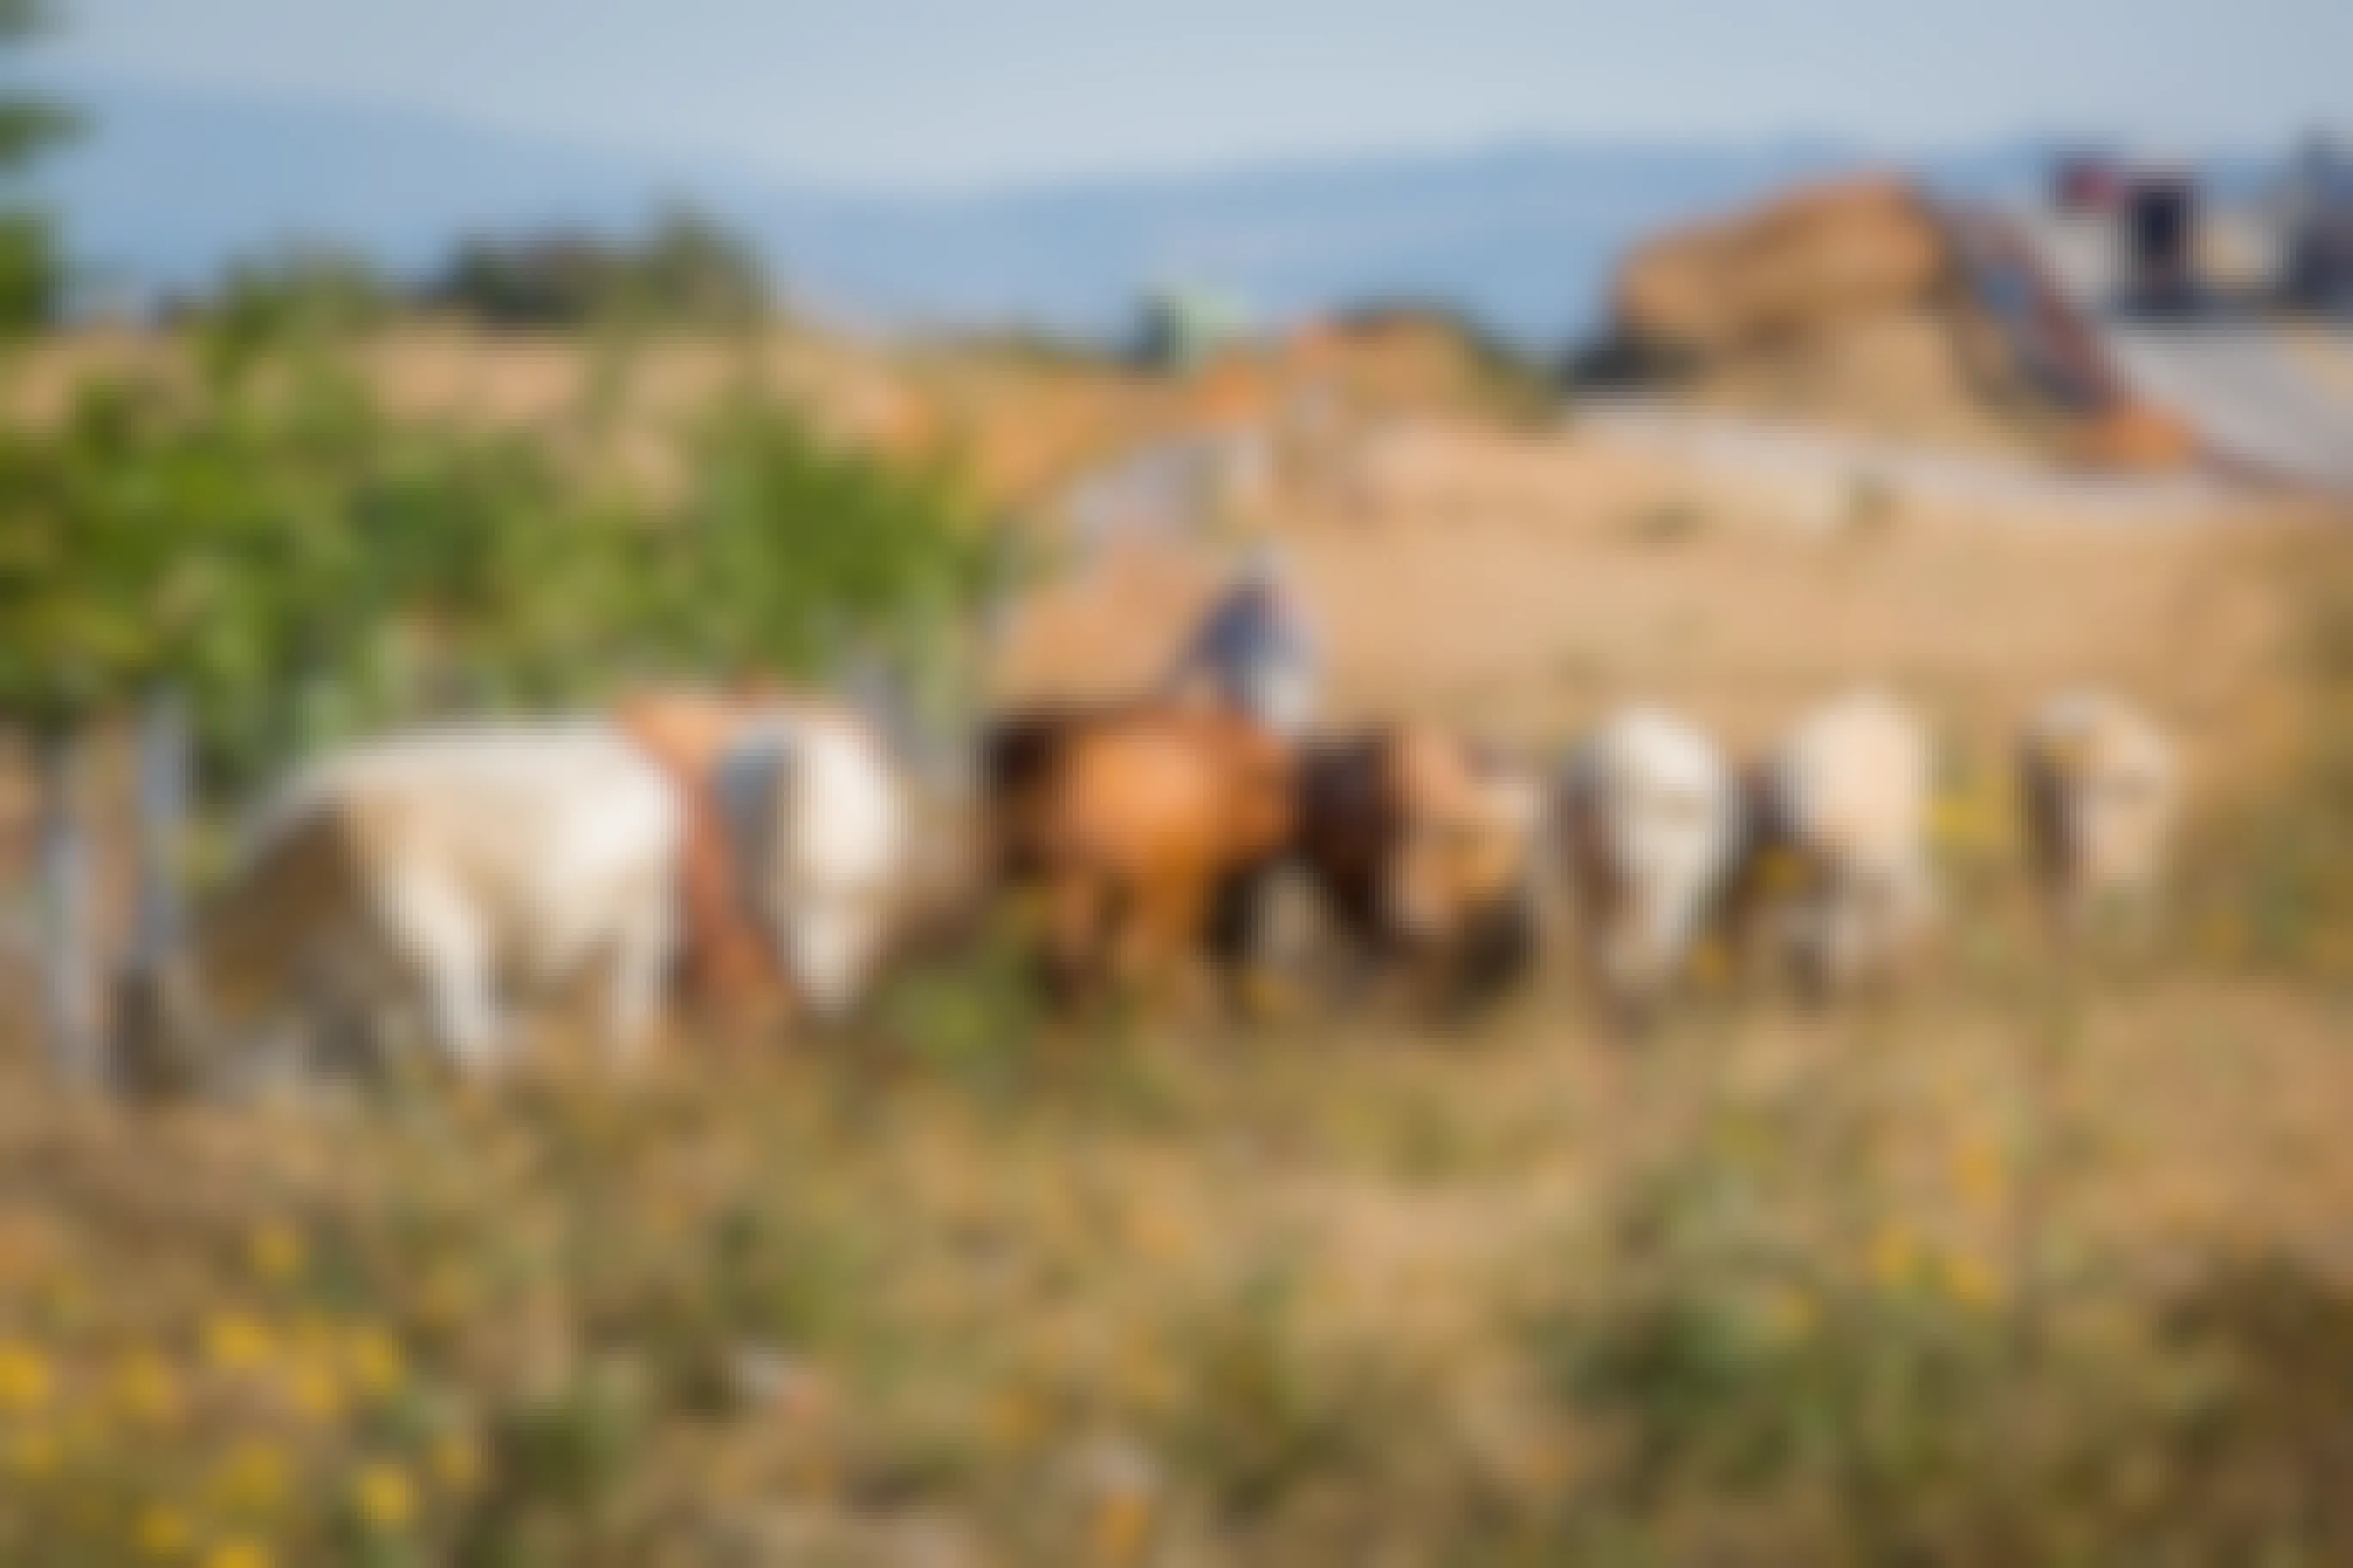 A ranch hand with cattle — cattle are grazing in the grass.